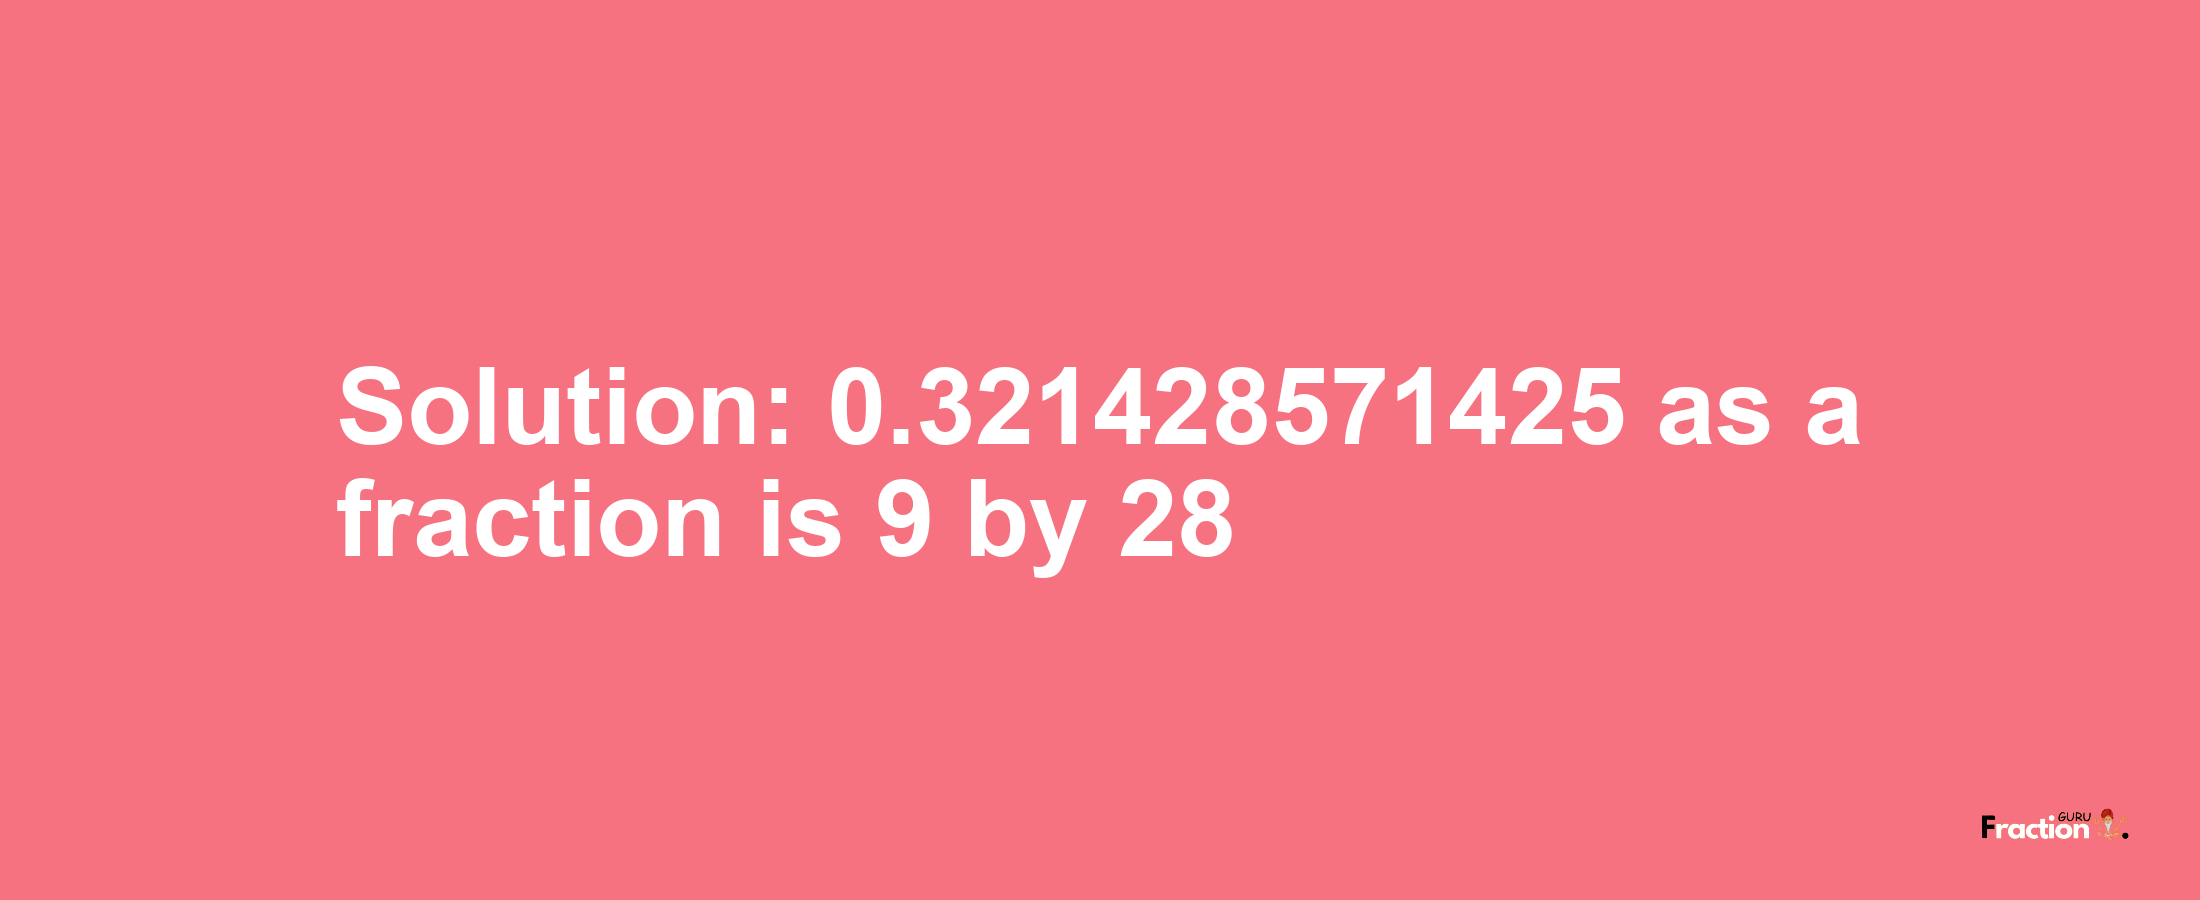 Solution:0.321428571425 as a fraction is 9/28